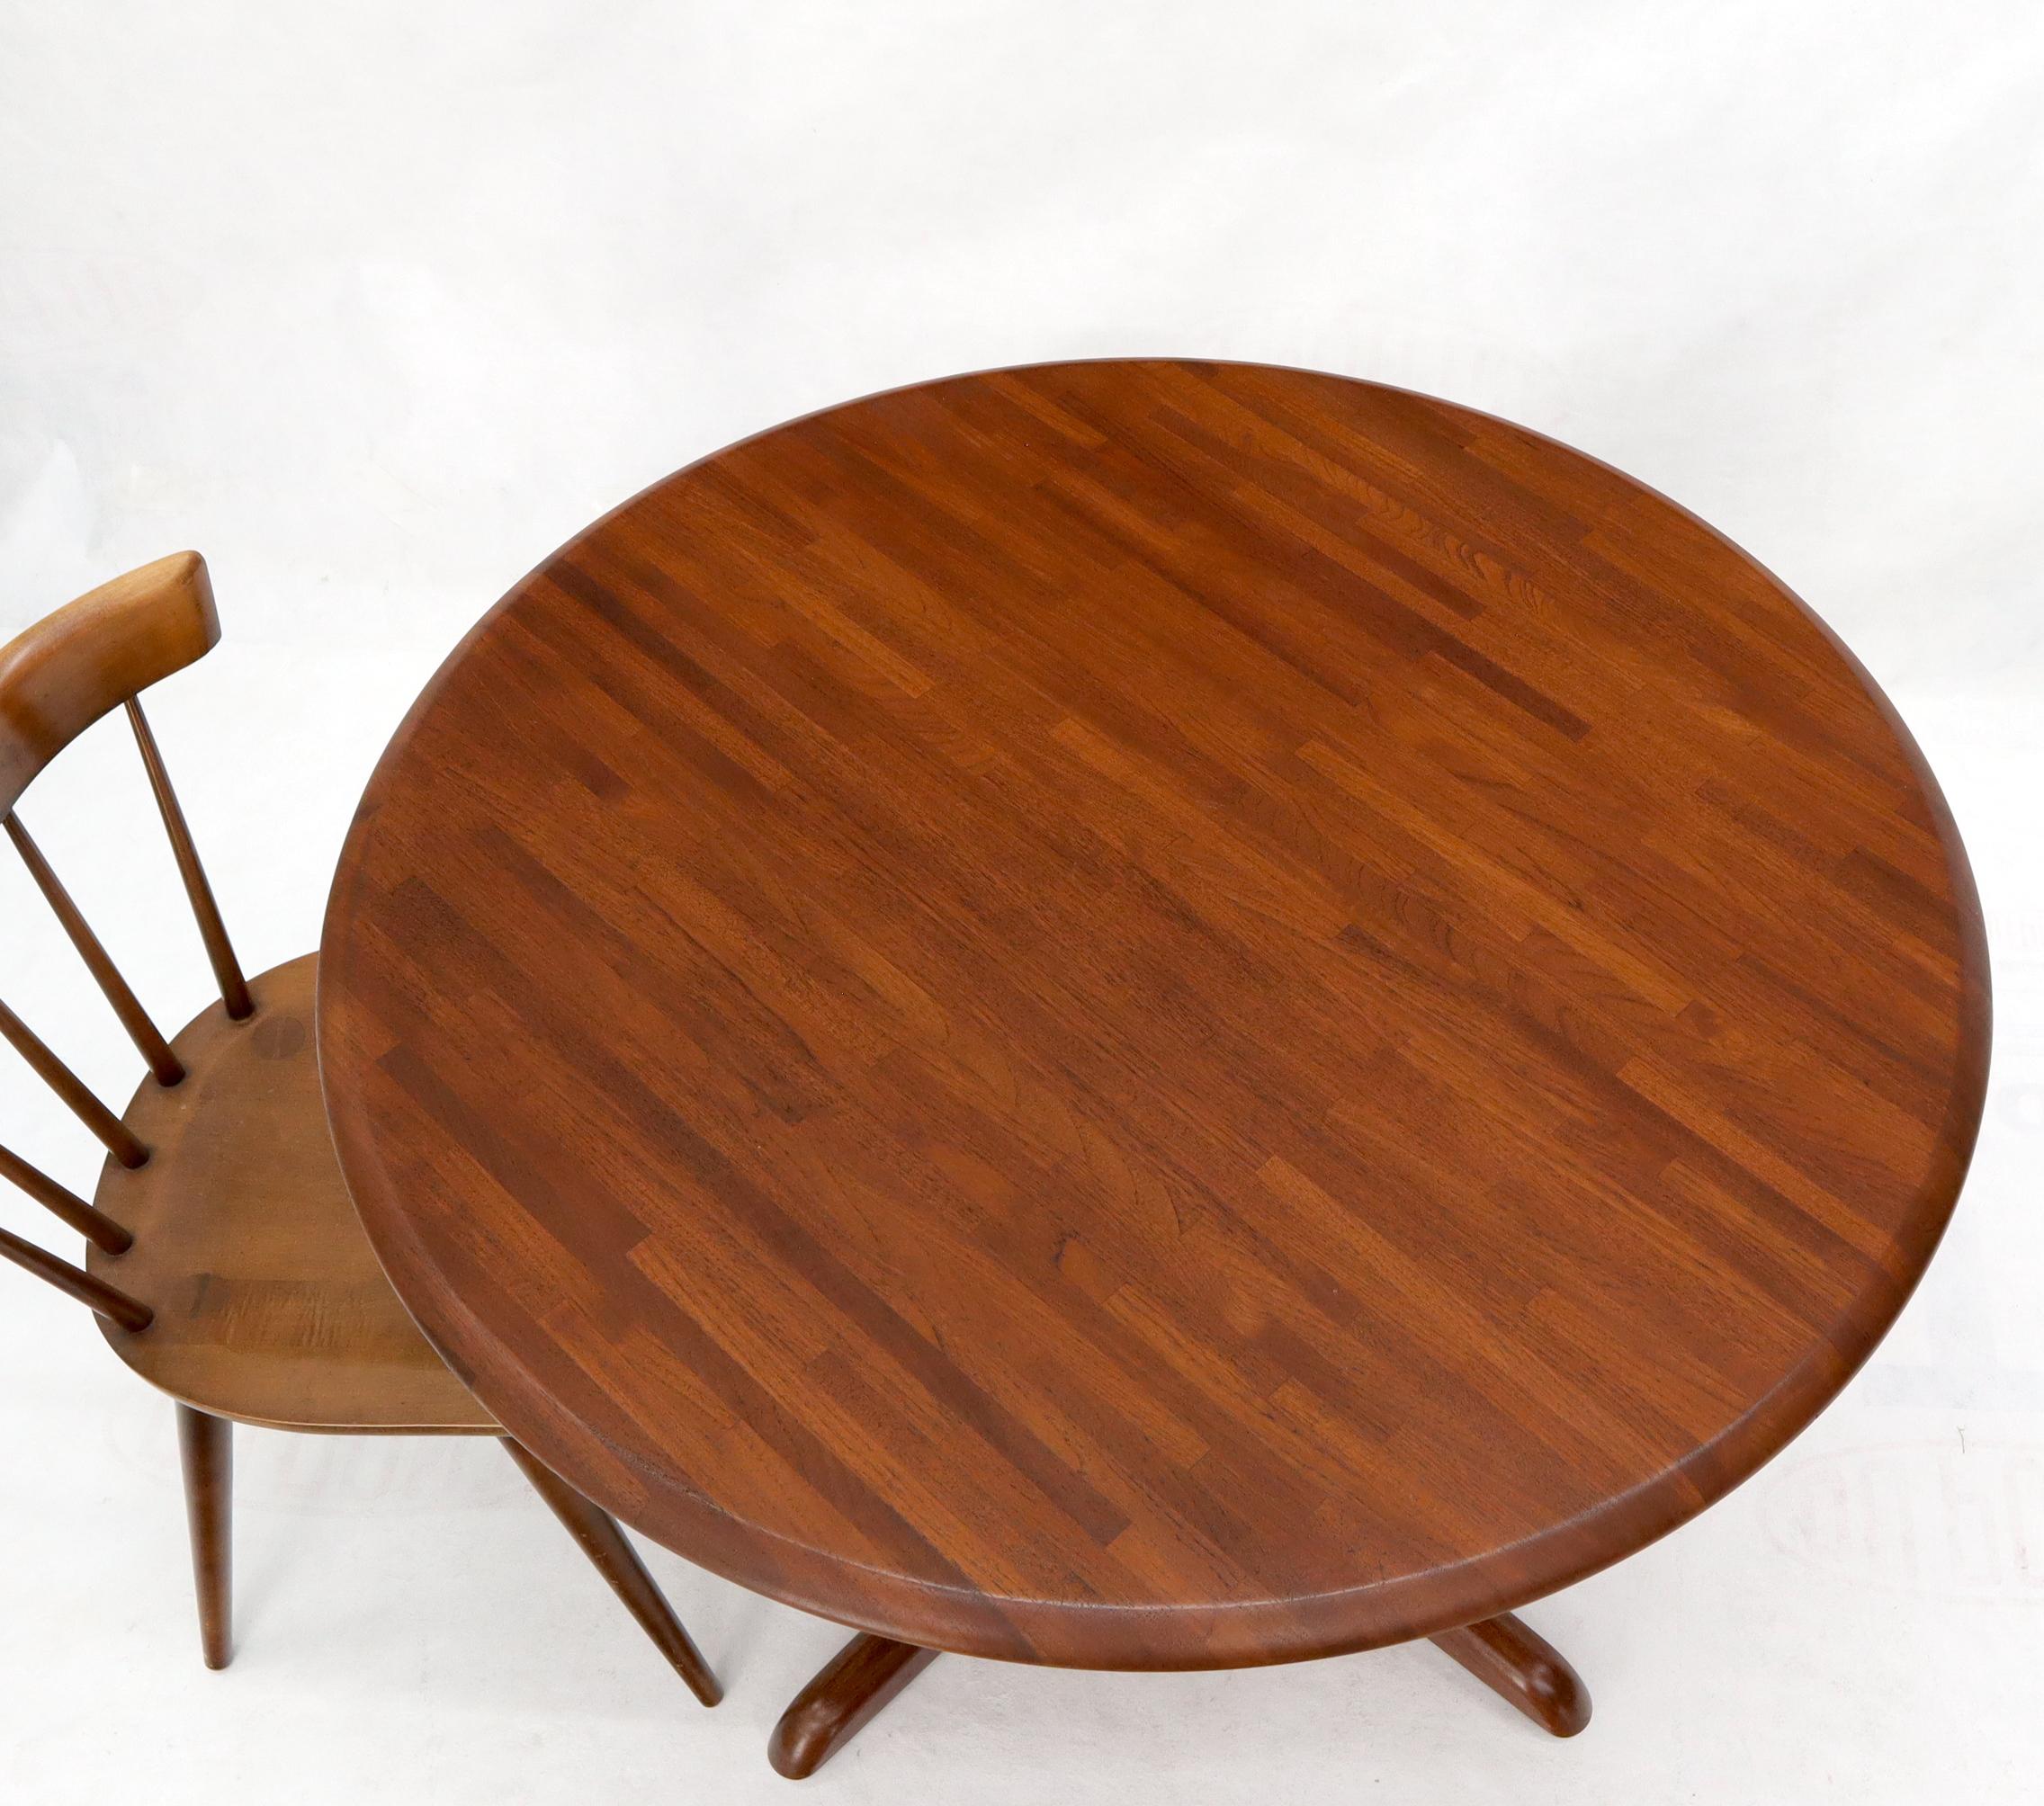 20th Century Solid Teak Danish Mid-Century Modern Round Dining Dinette Table For Sale